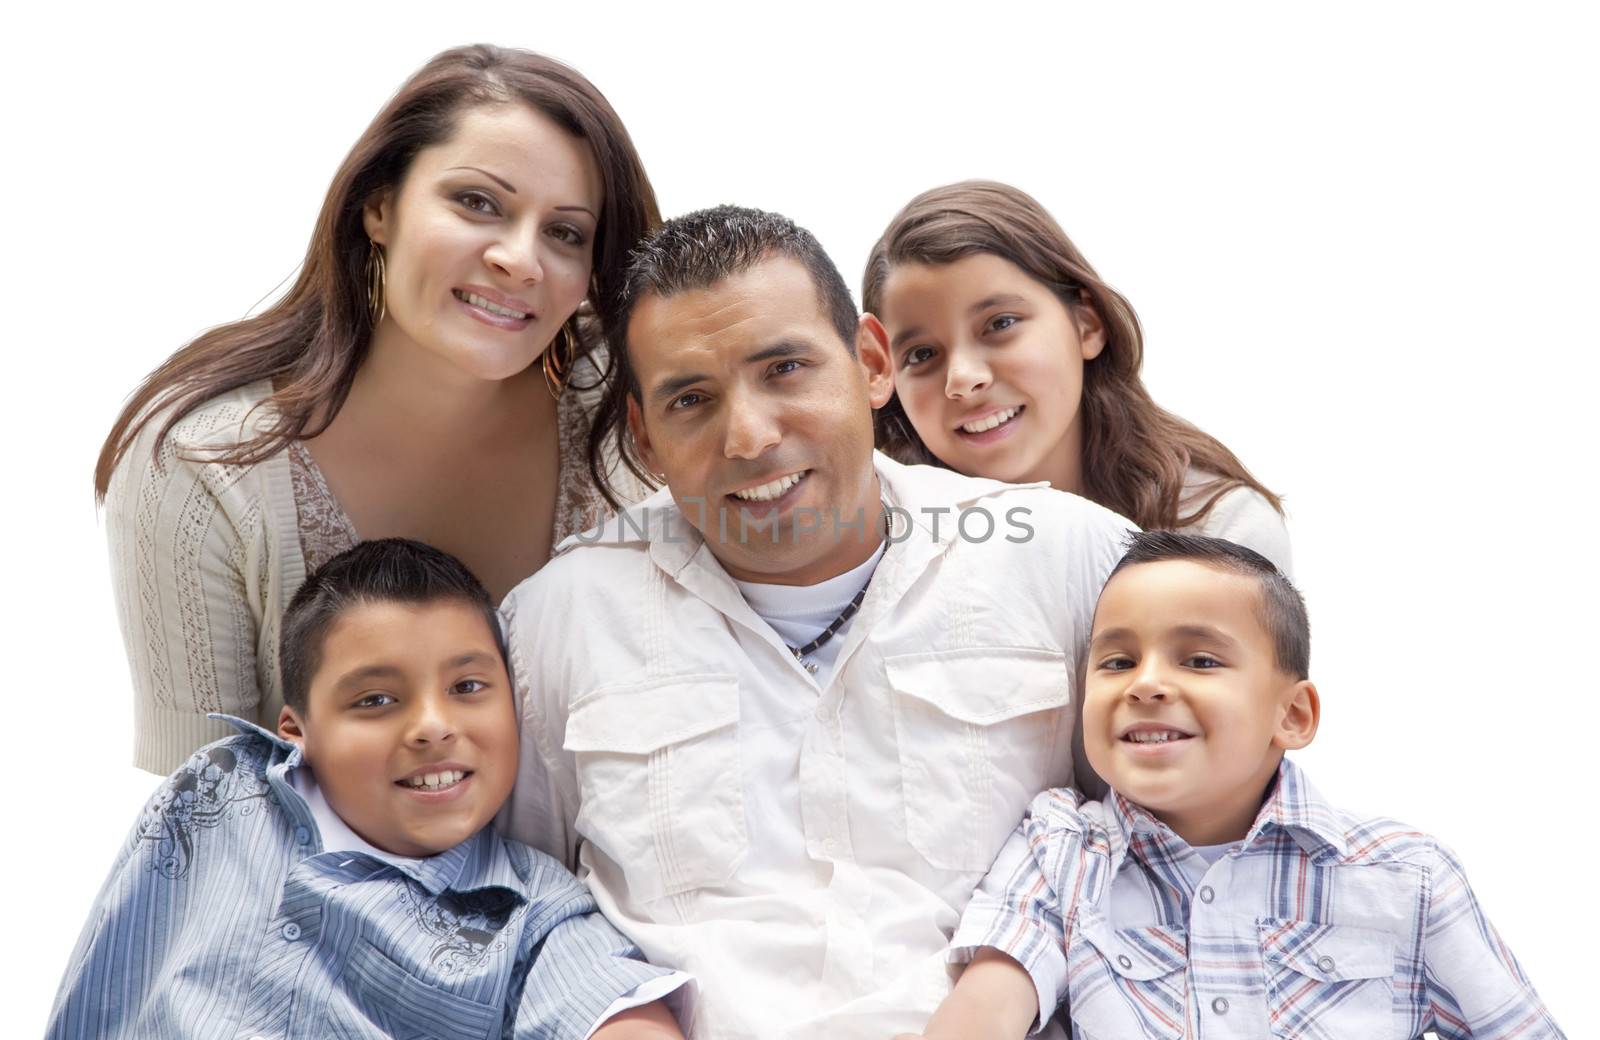 Happy Attractive Hispanic Family Portrait Isolated on a White Background.